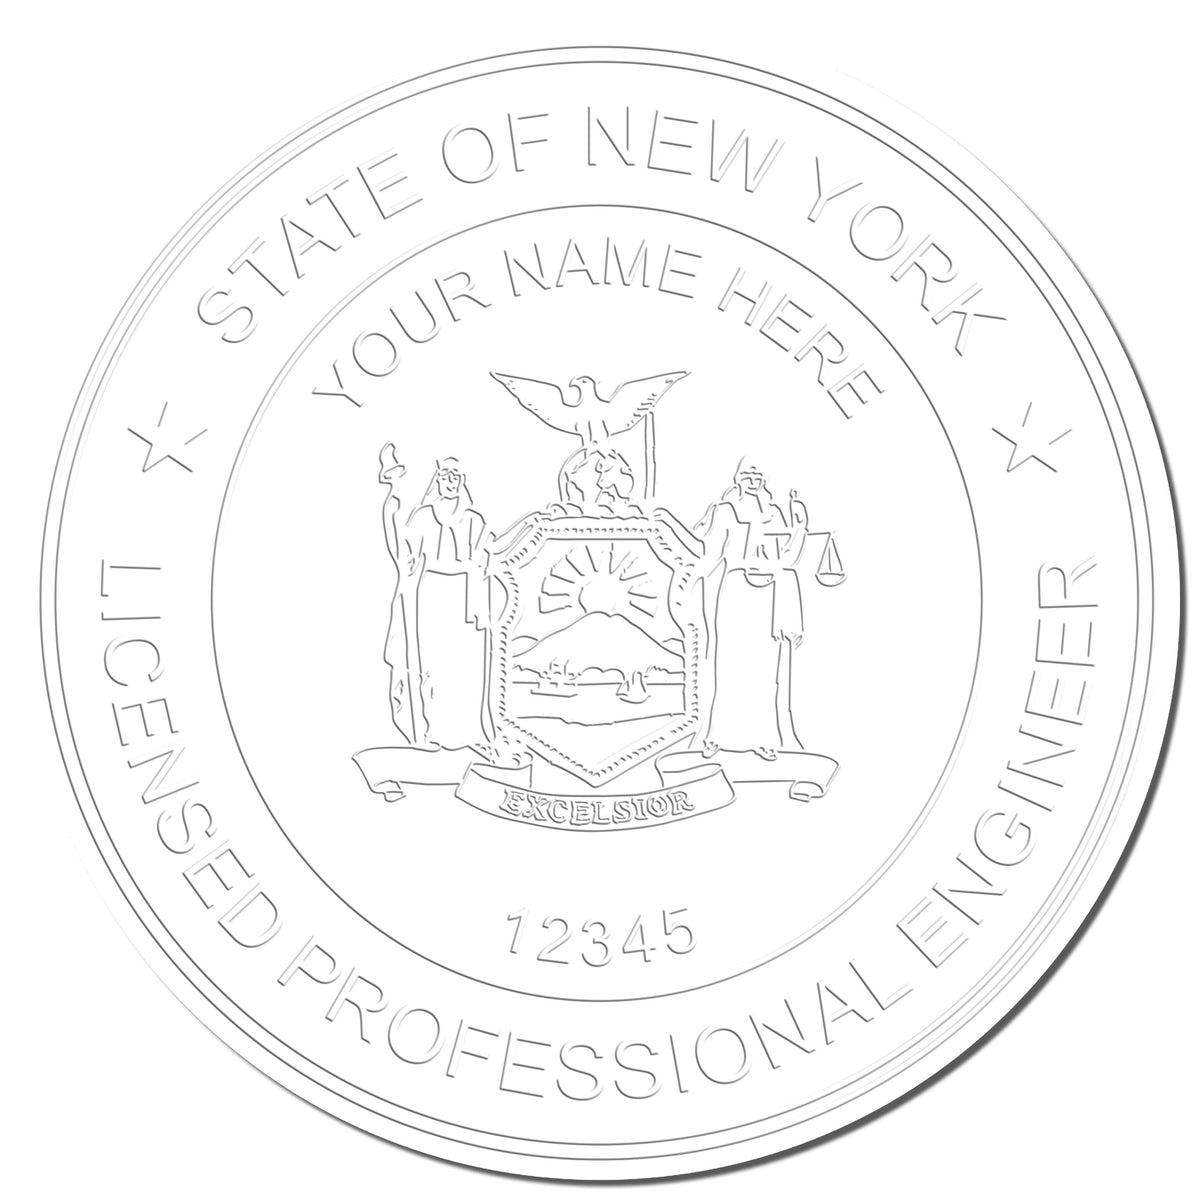 This paper is stamped with a sample imprint of the Gift New York Engineer Seal, signifying its quality and reliability.